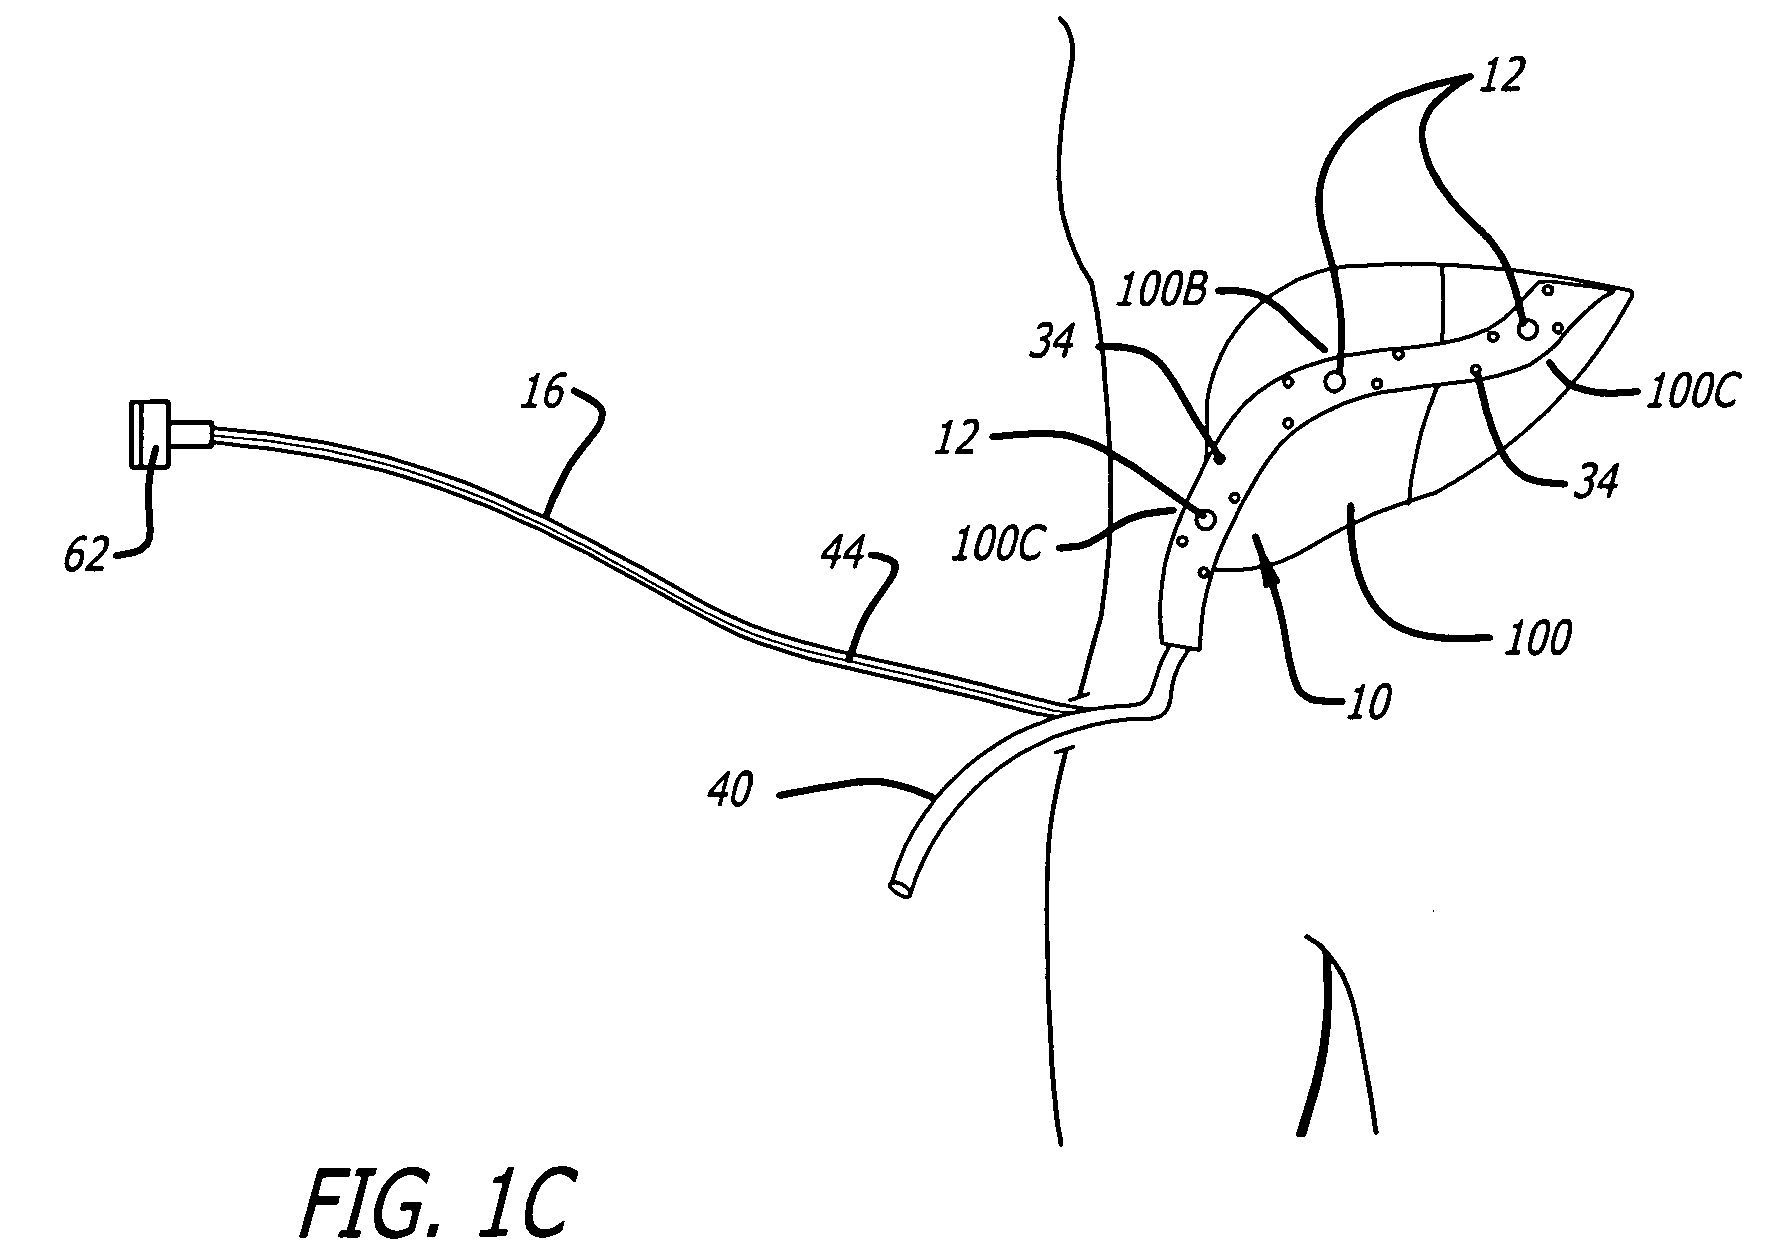 Surgical drain with sensors for monitoring internal tissue condition by transmittance